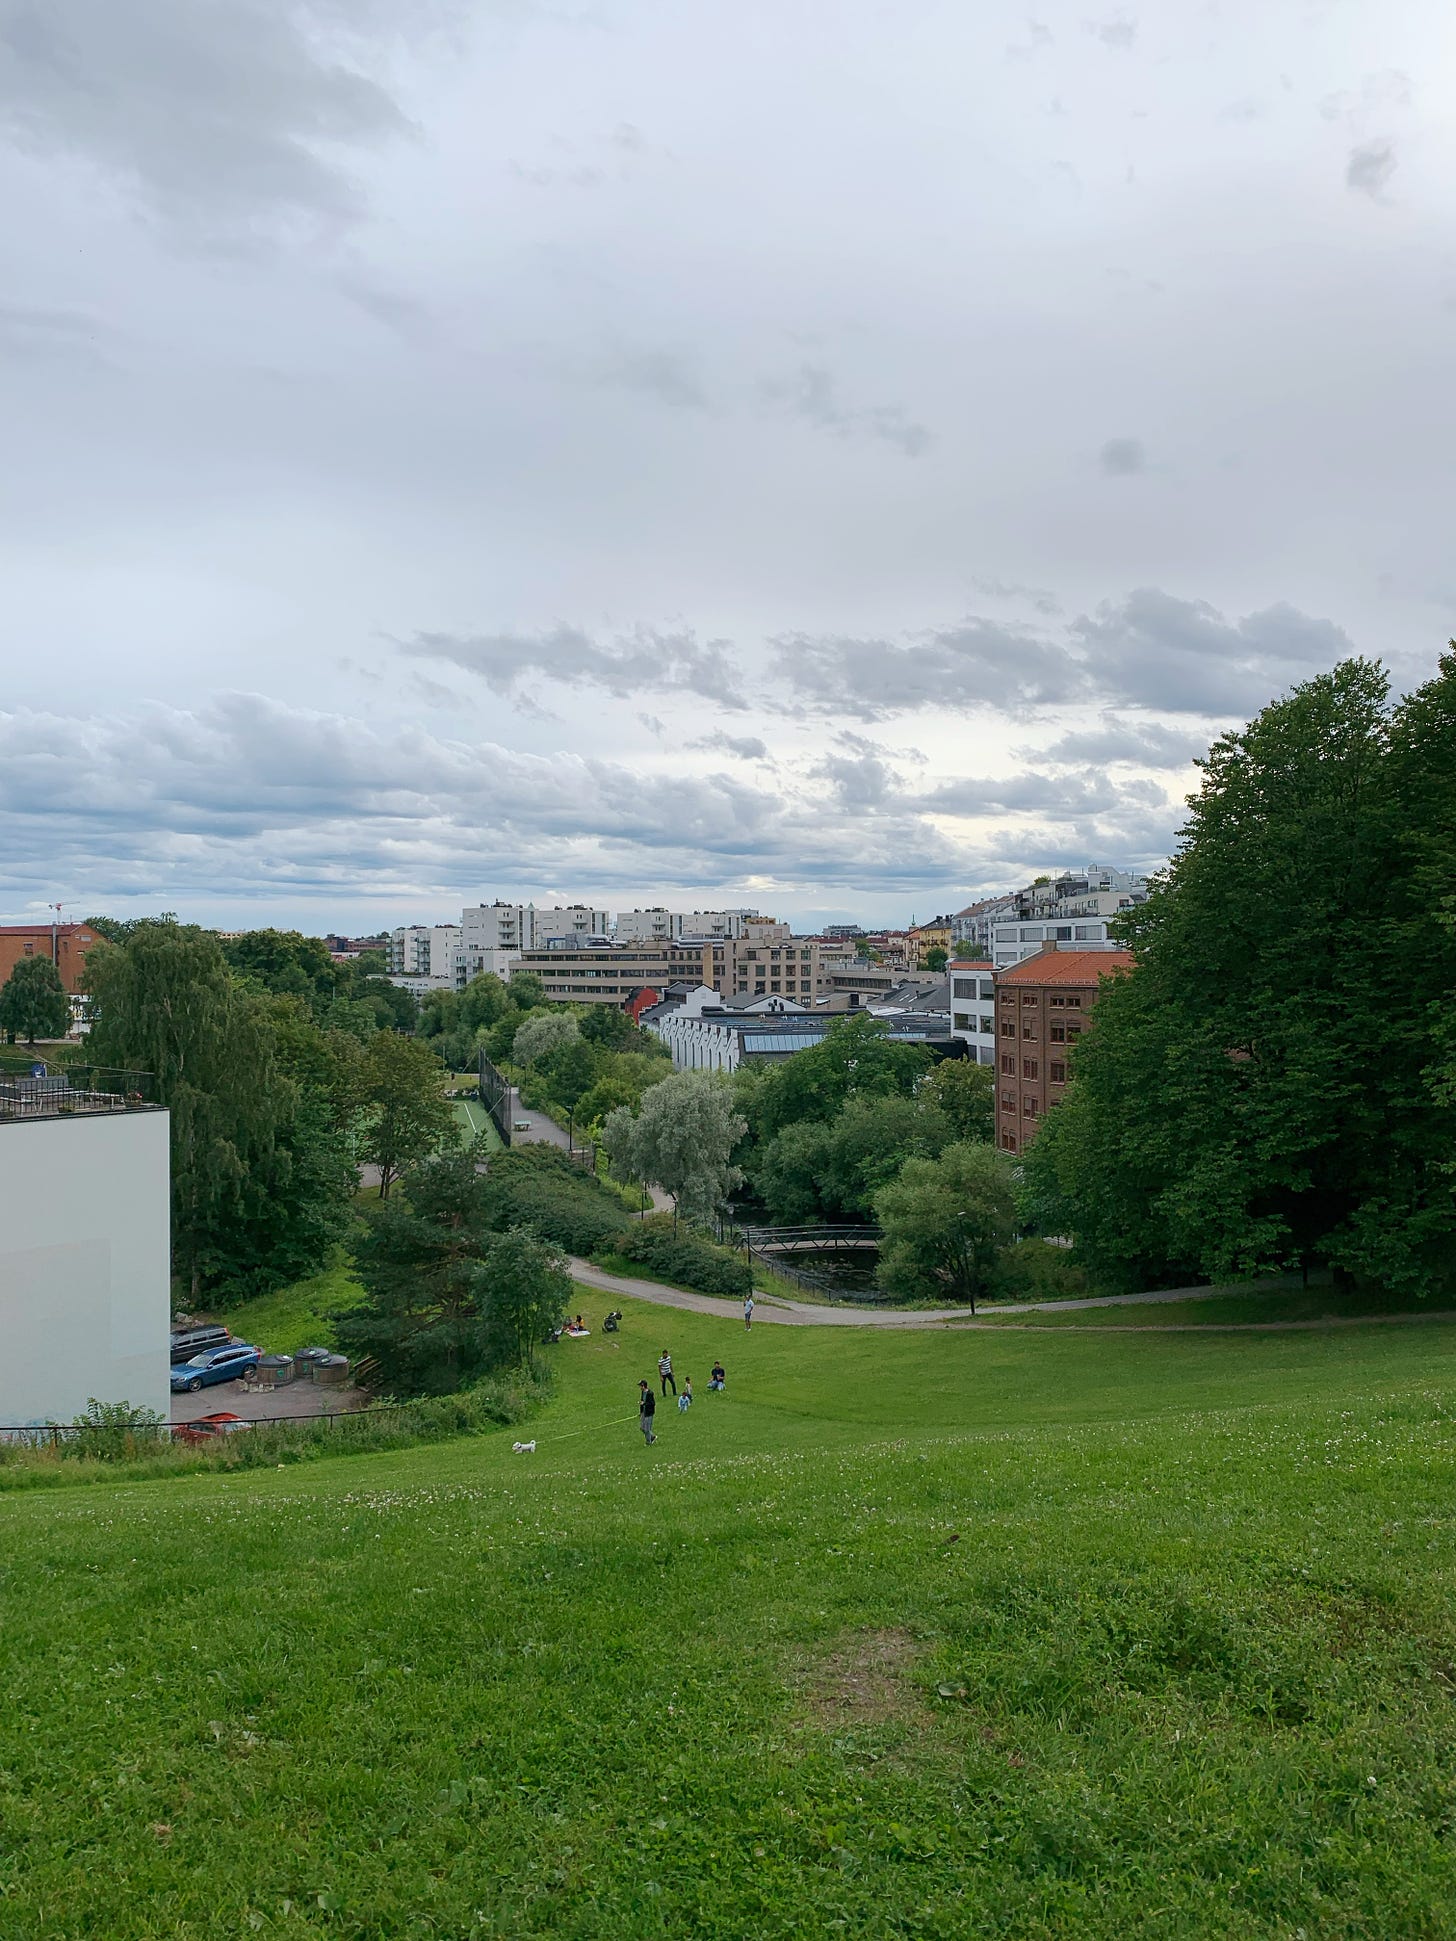 View of Oslo from a hill